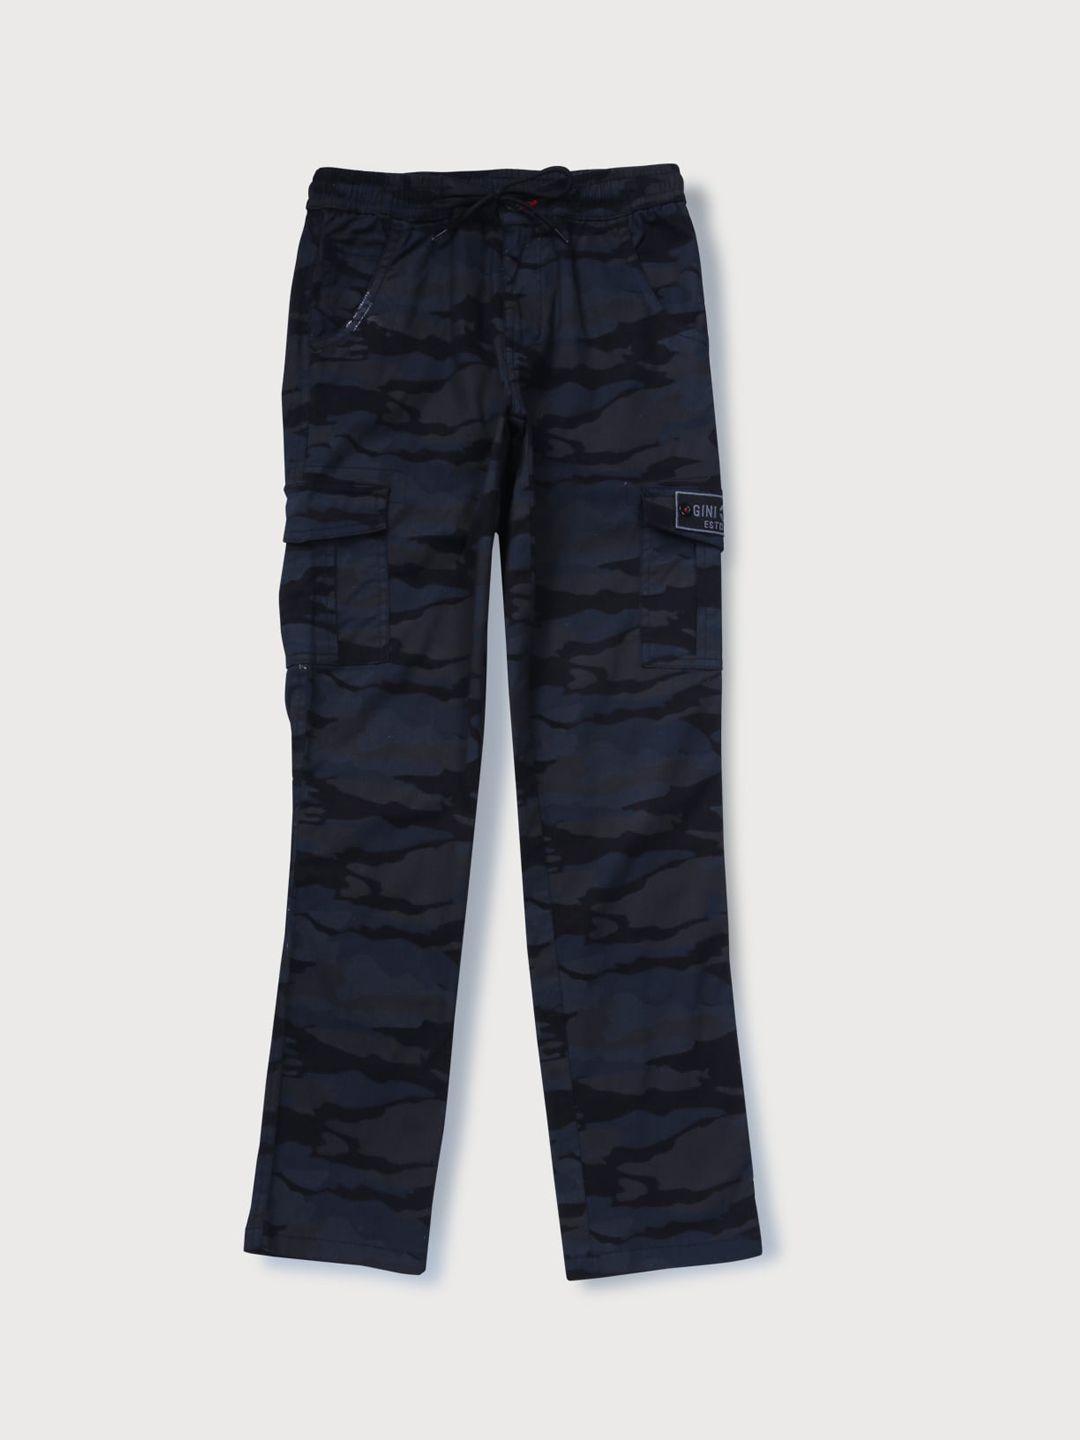 gini-and-jony-boys-blue-camouflage-printed-cargos-trousers